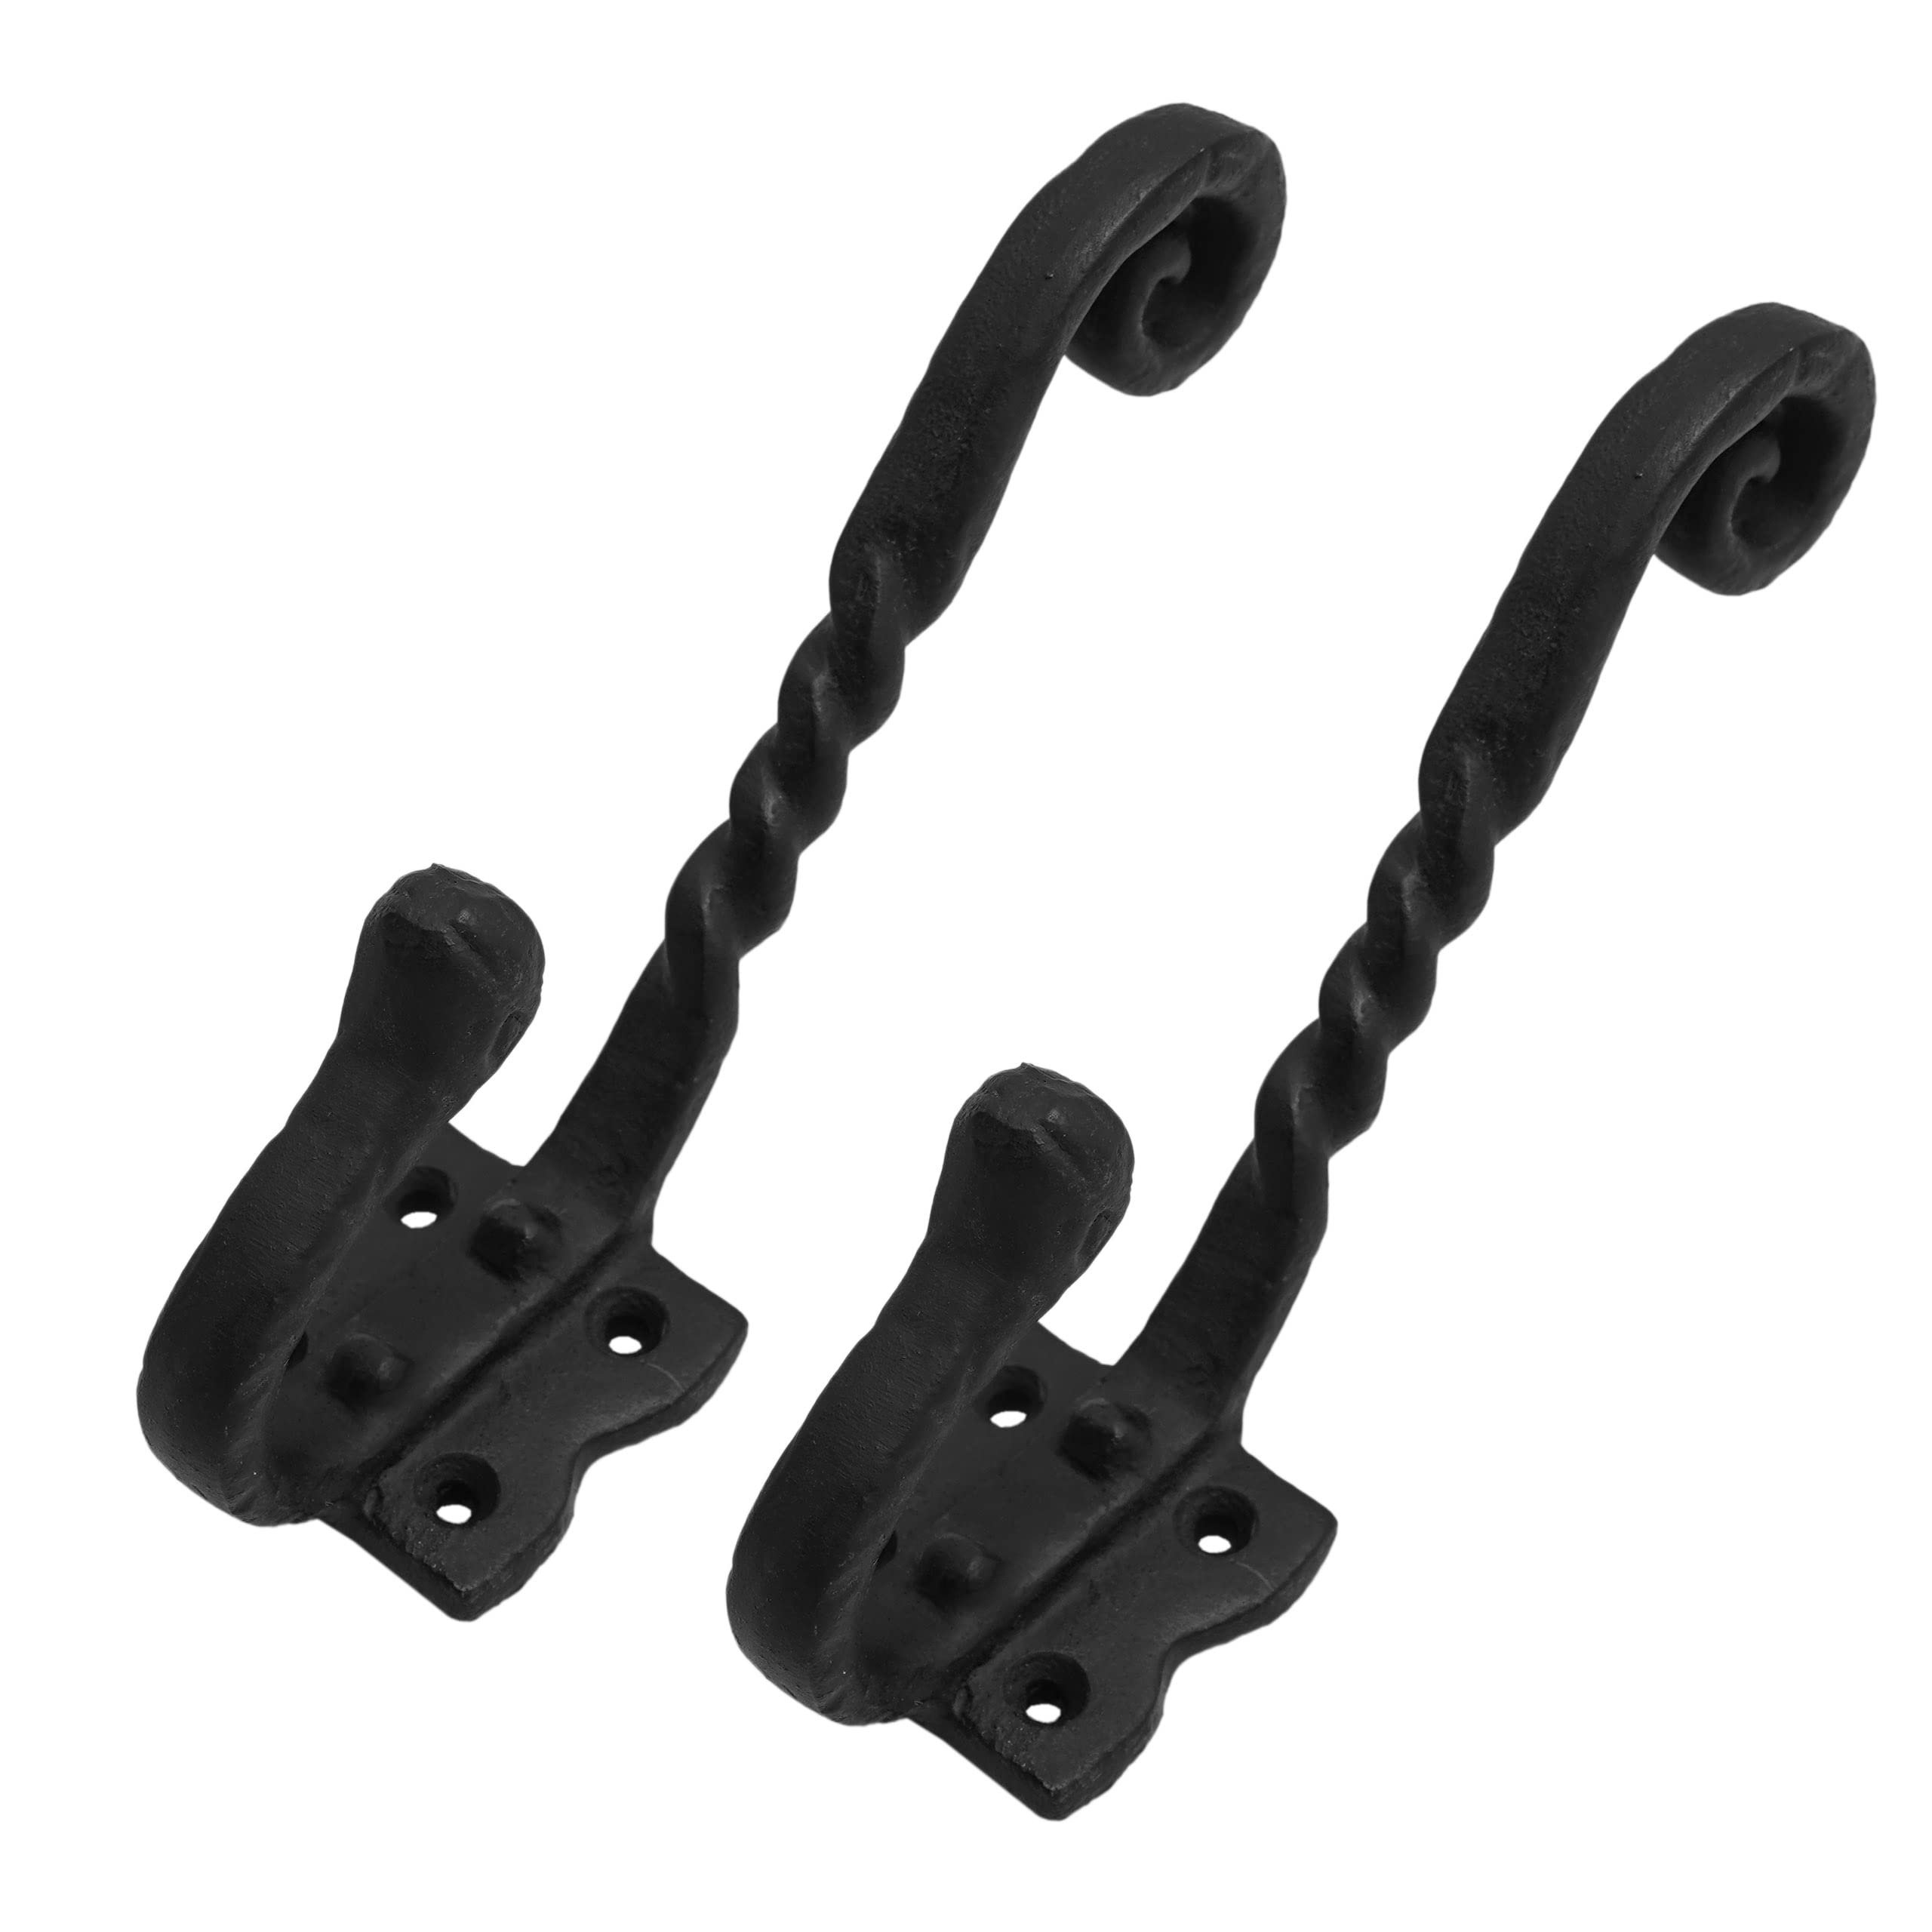 Caryna Heavy Duty Rustic Iron Wall Hooks Retro Utility for Hanging Coat,  Bag, Towel, Robe, Hat